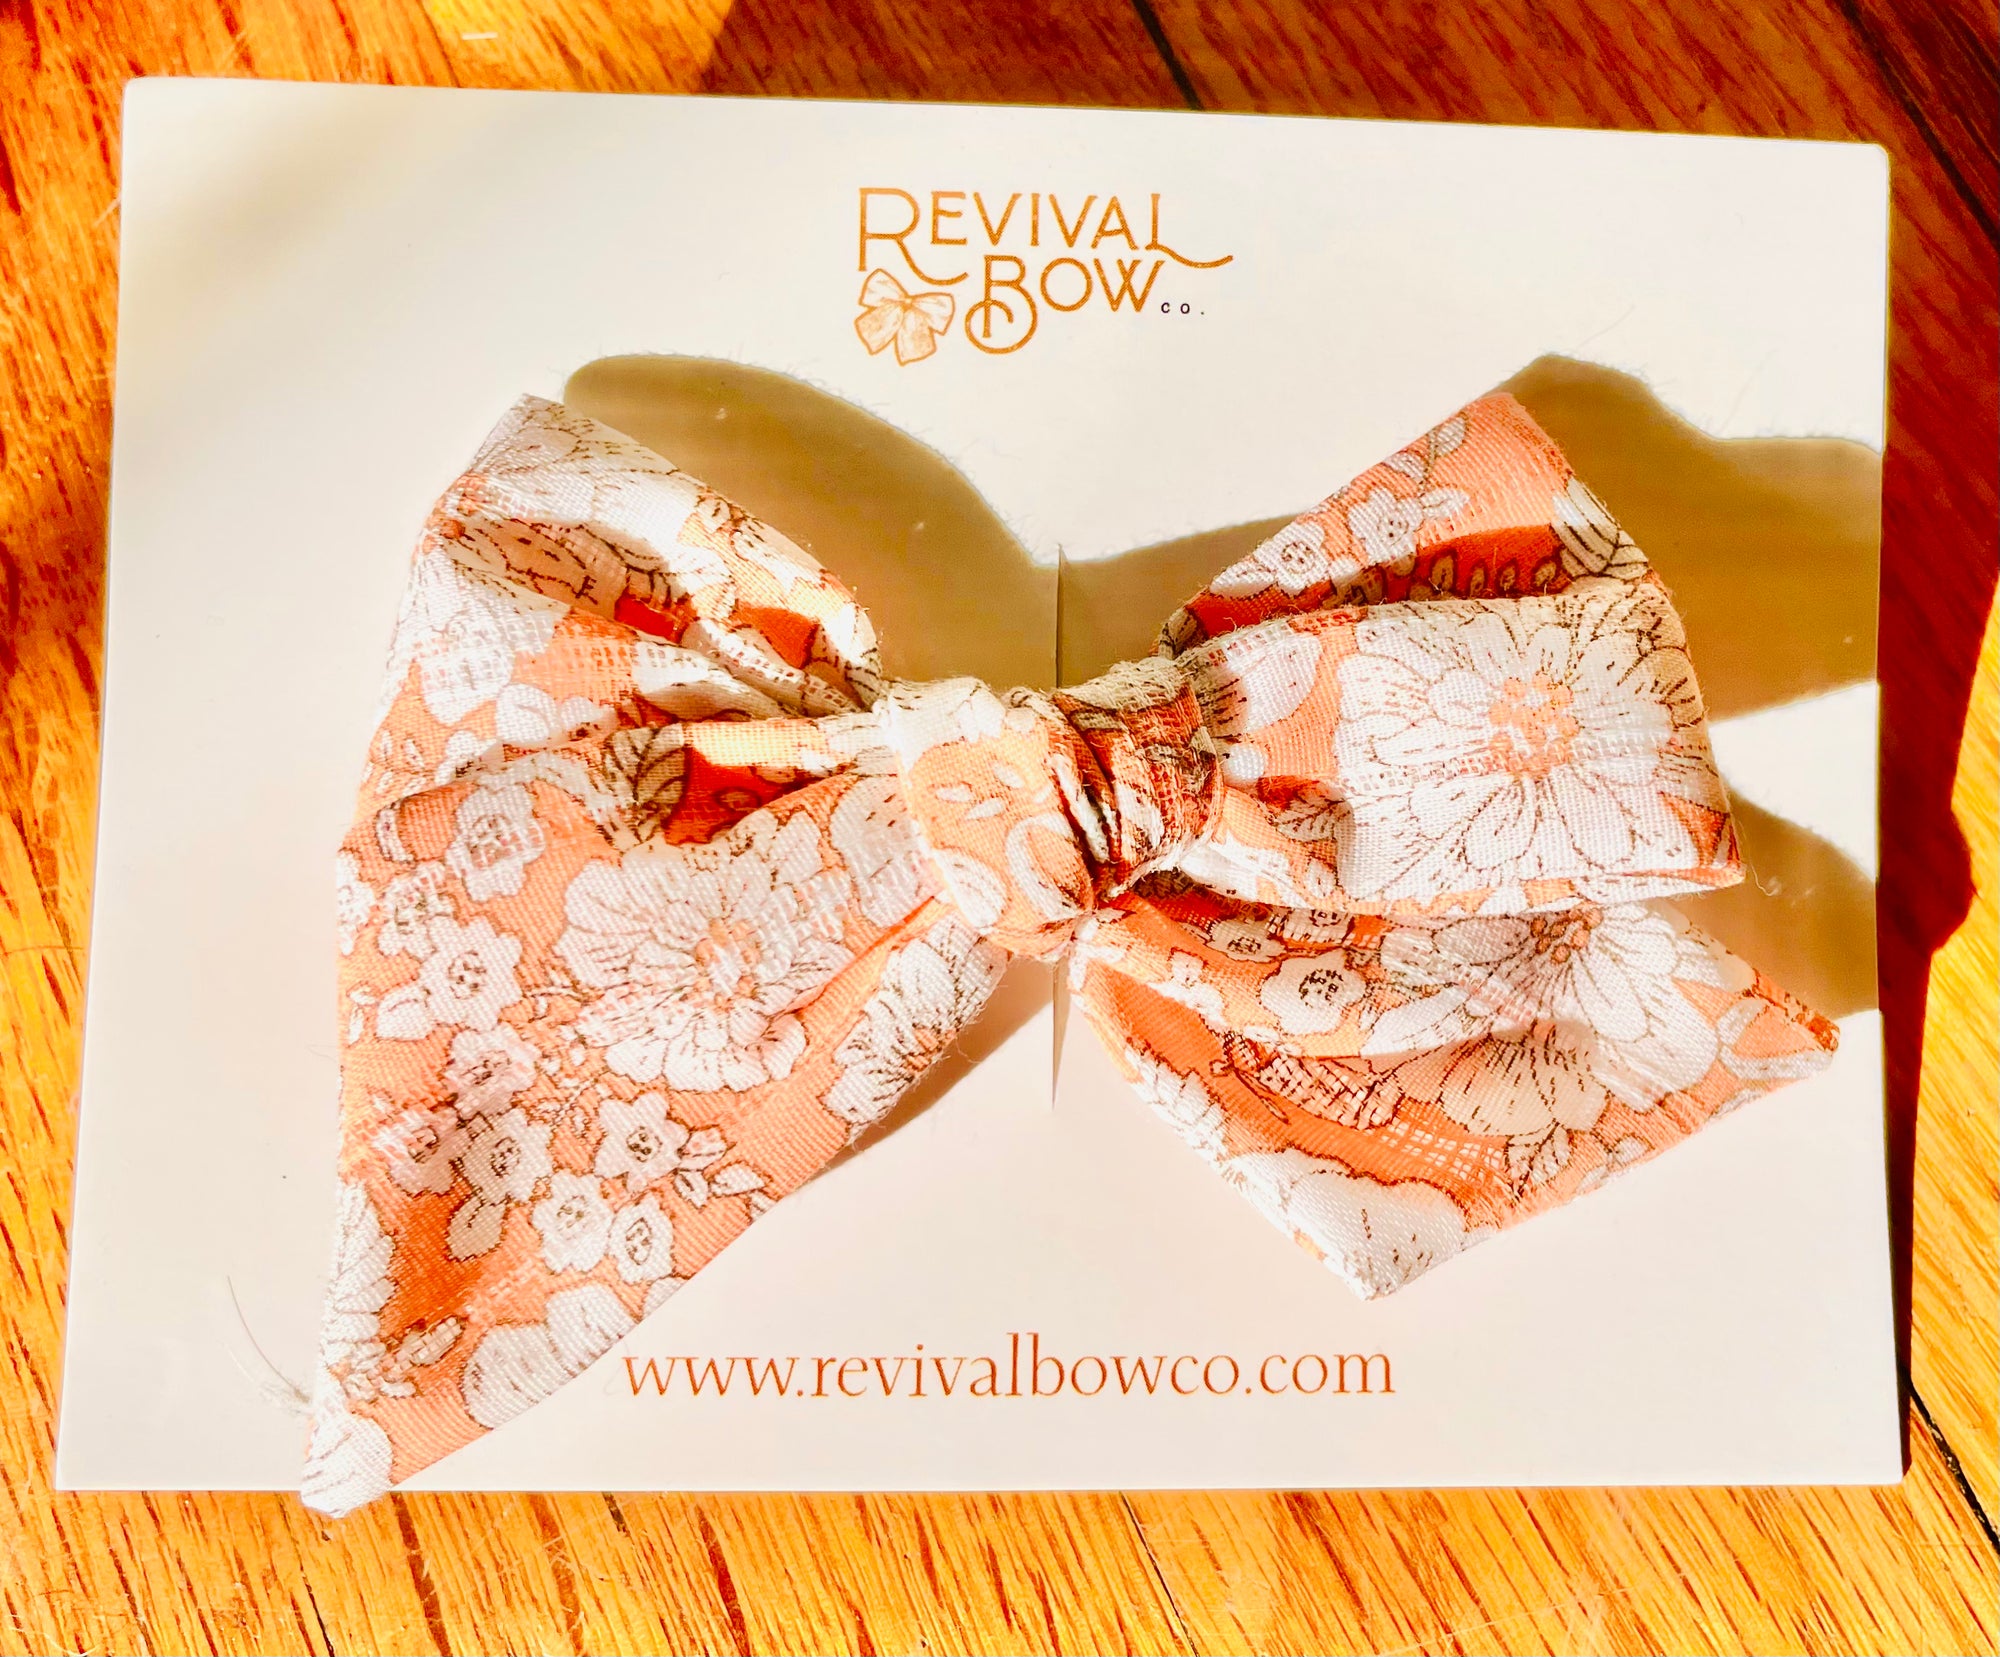 Revival Bow Co - Vintage Fabric Pinwheel Bow - Peach Floral